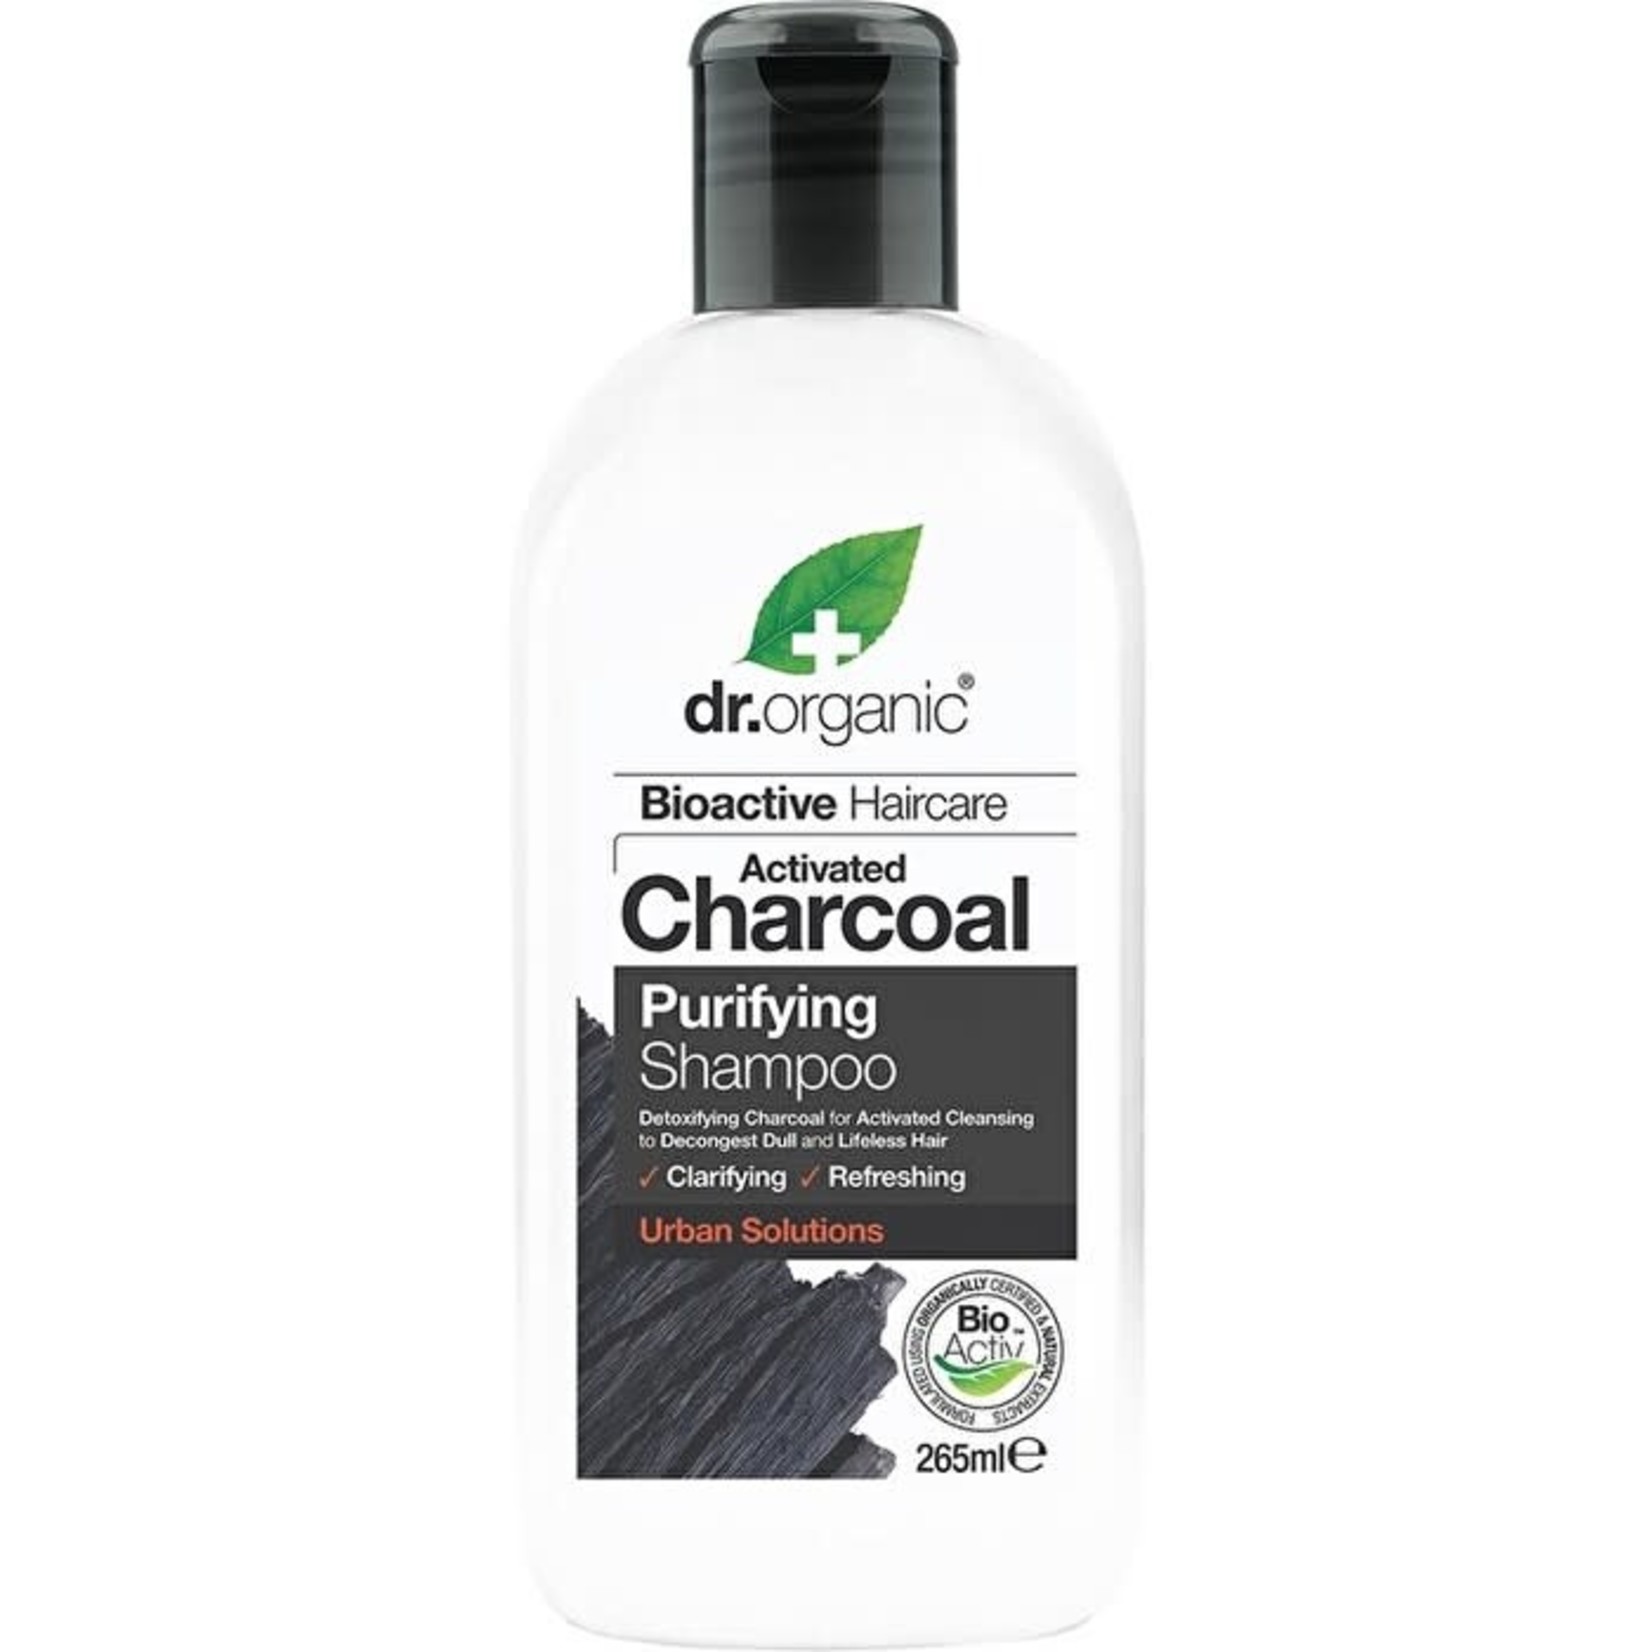 Dr Organic Dr Organic Activated Charcoal Shampoo 265ml